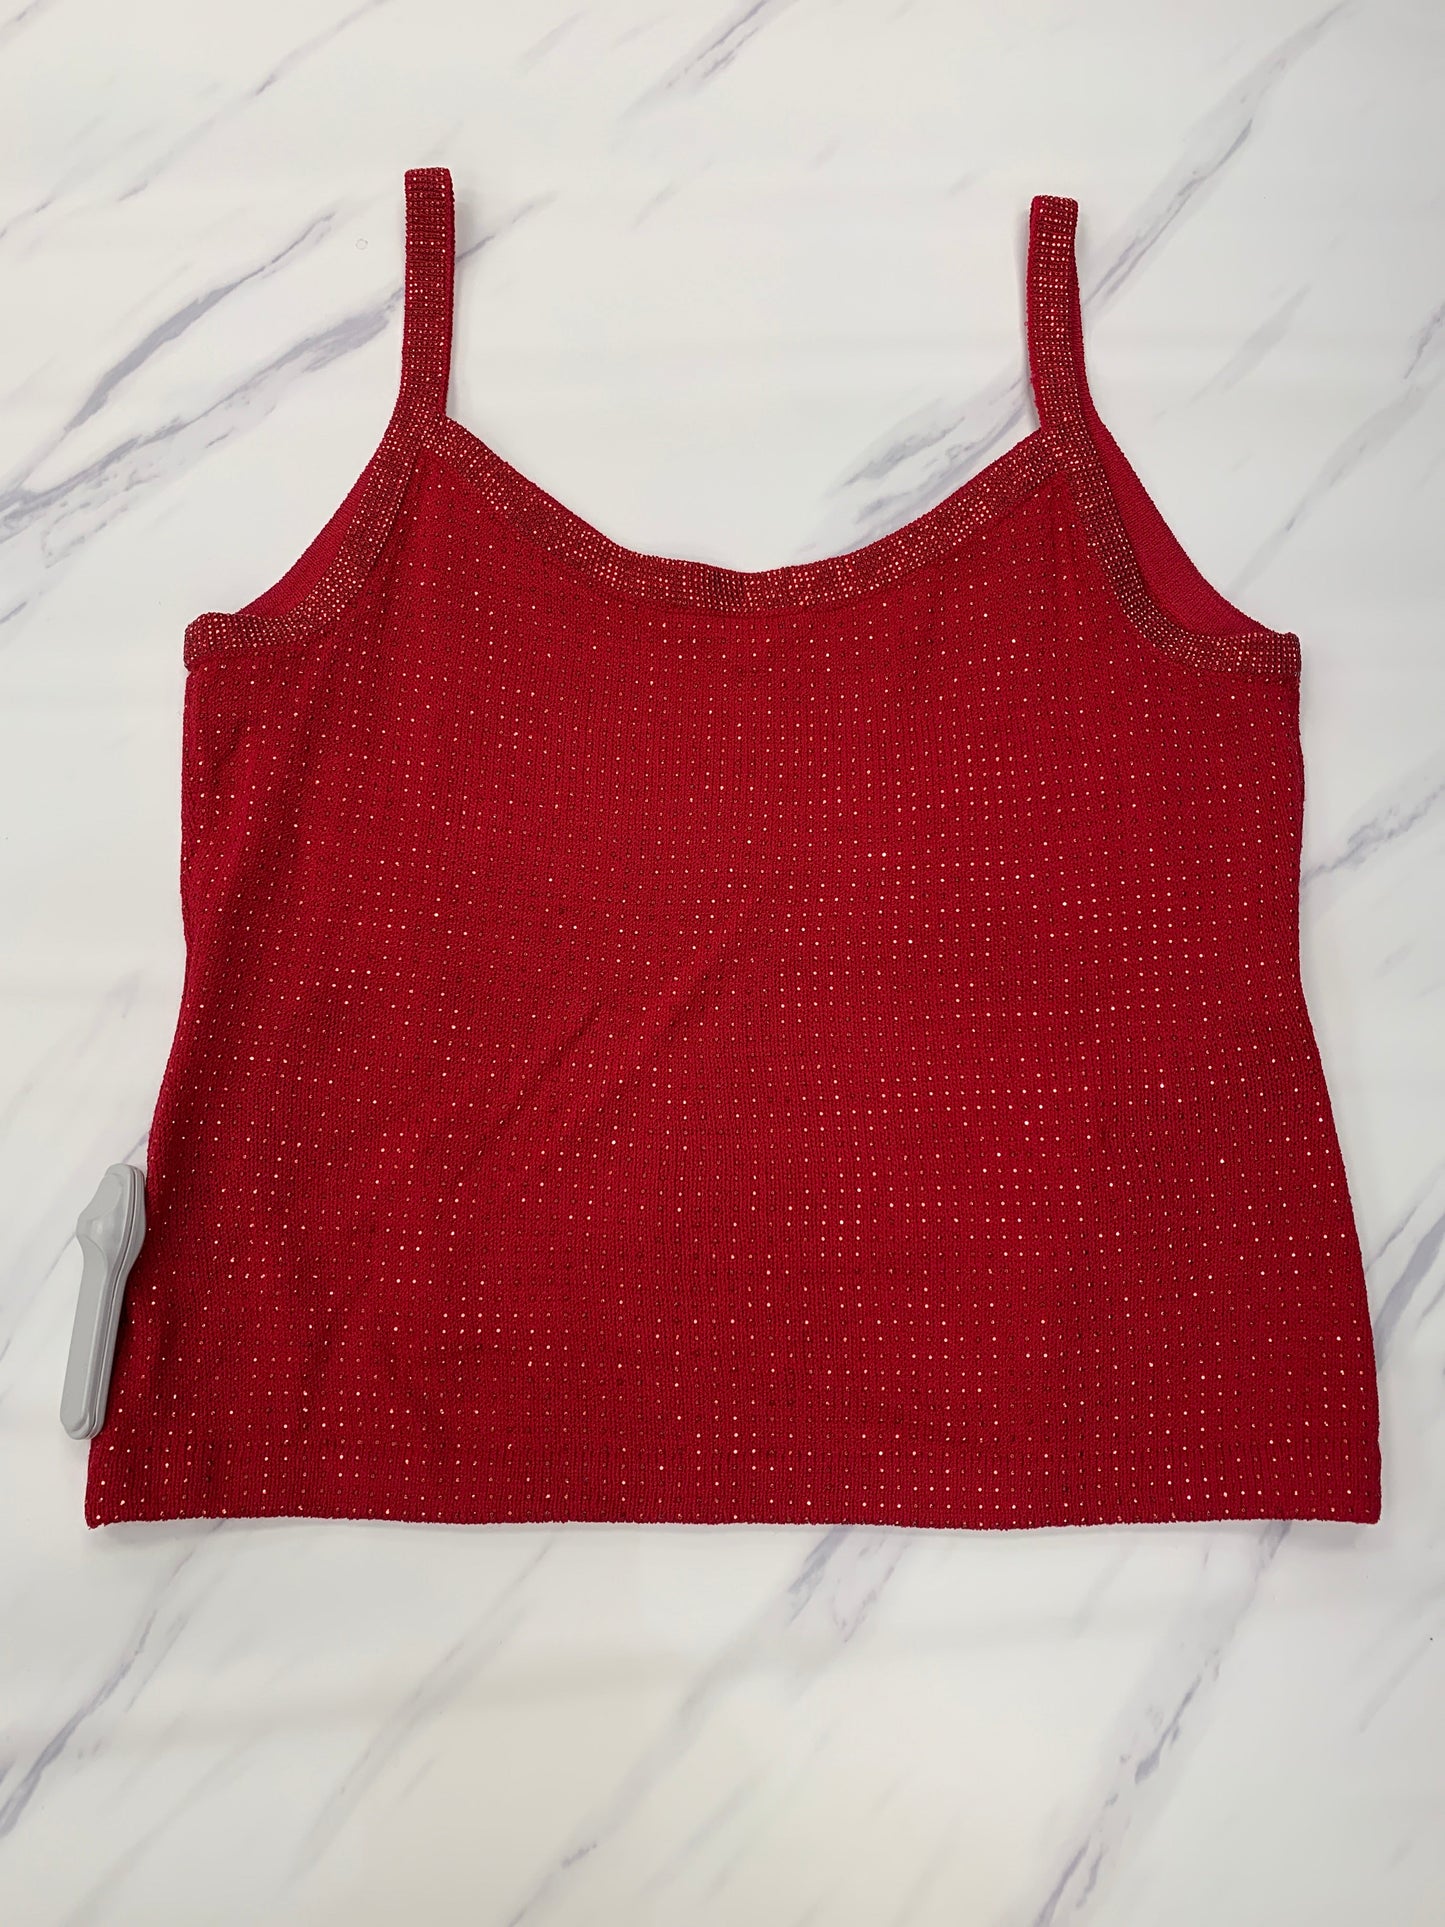 Red Top Sleeveless Designer St John Collection, Size M